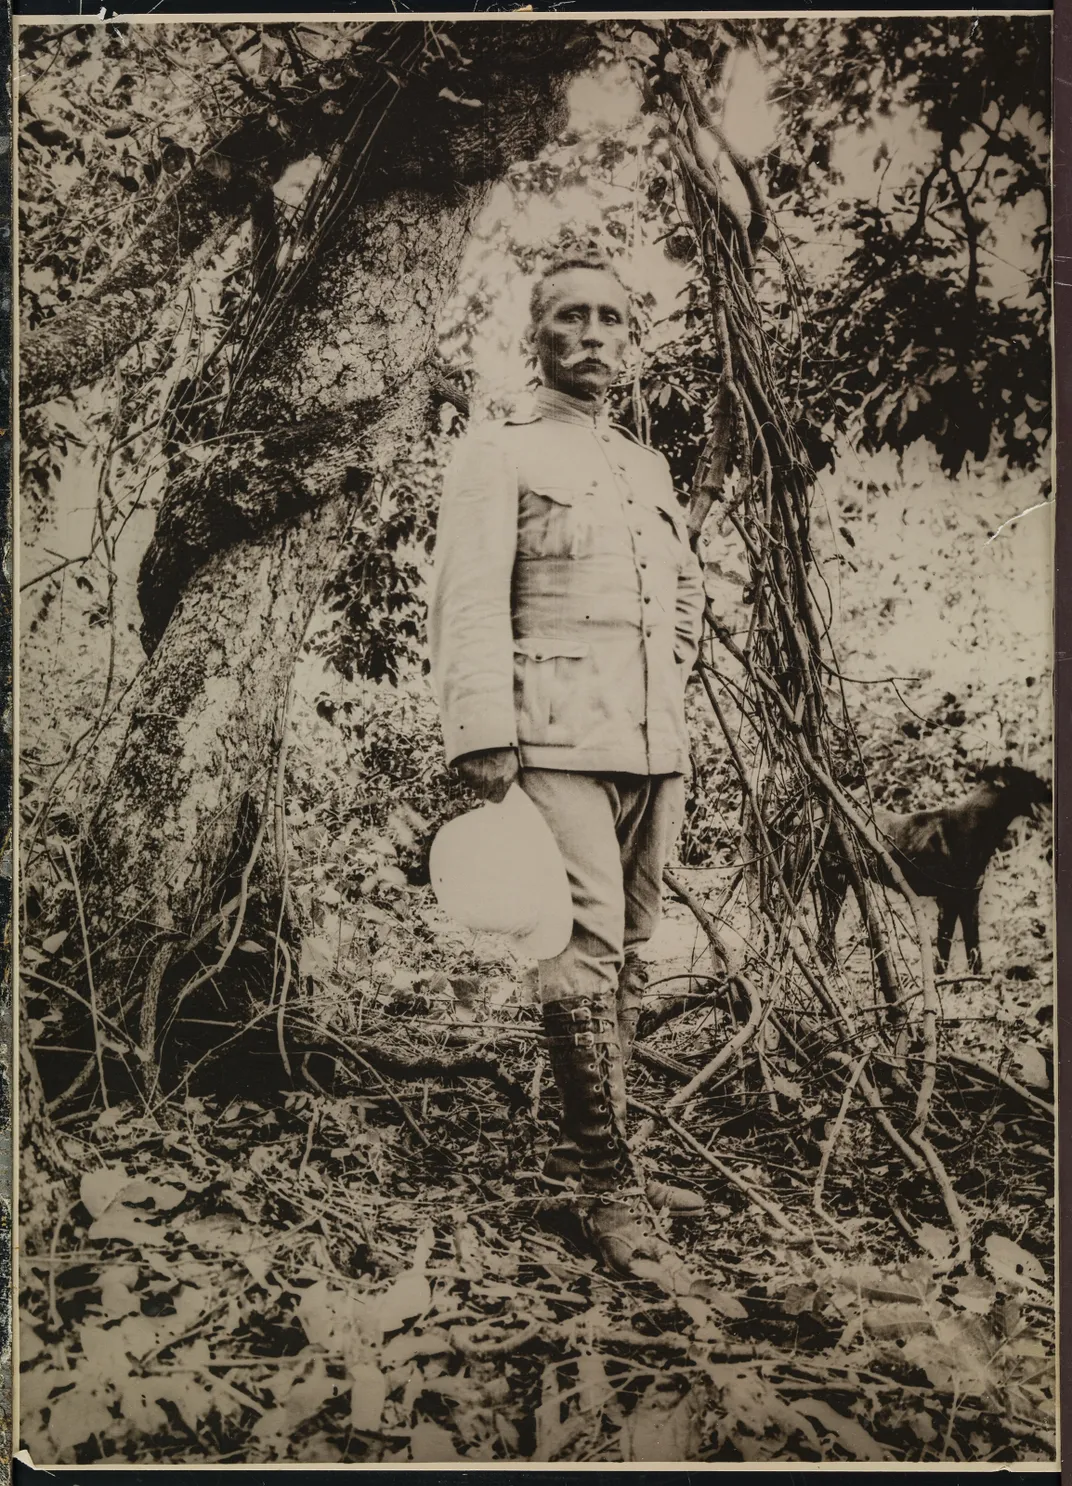 a portrait of a person standing up in a jungle atmosphere